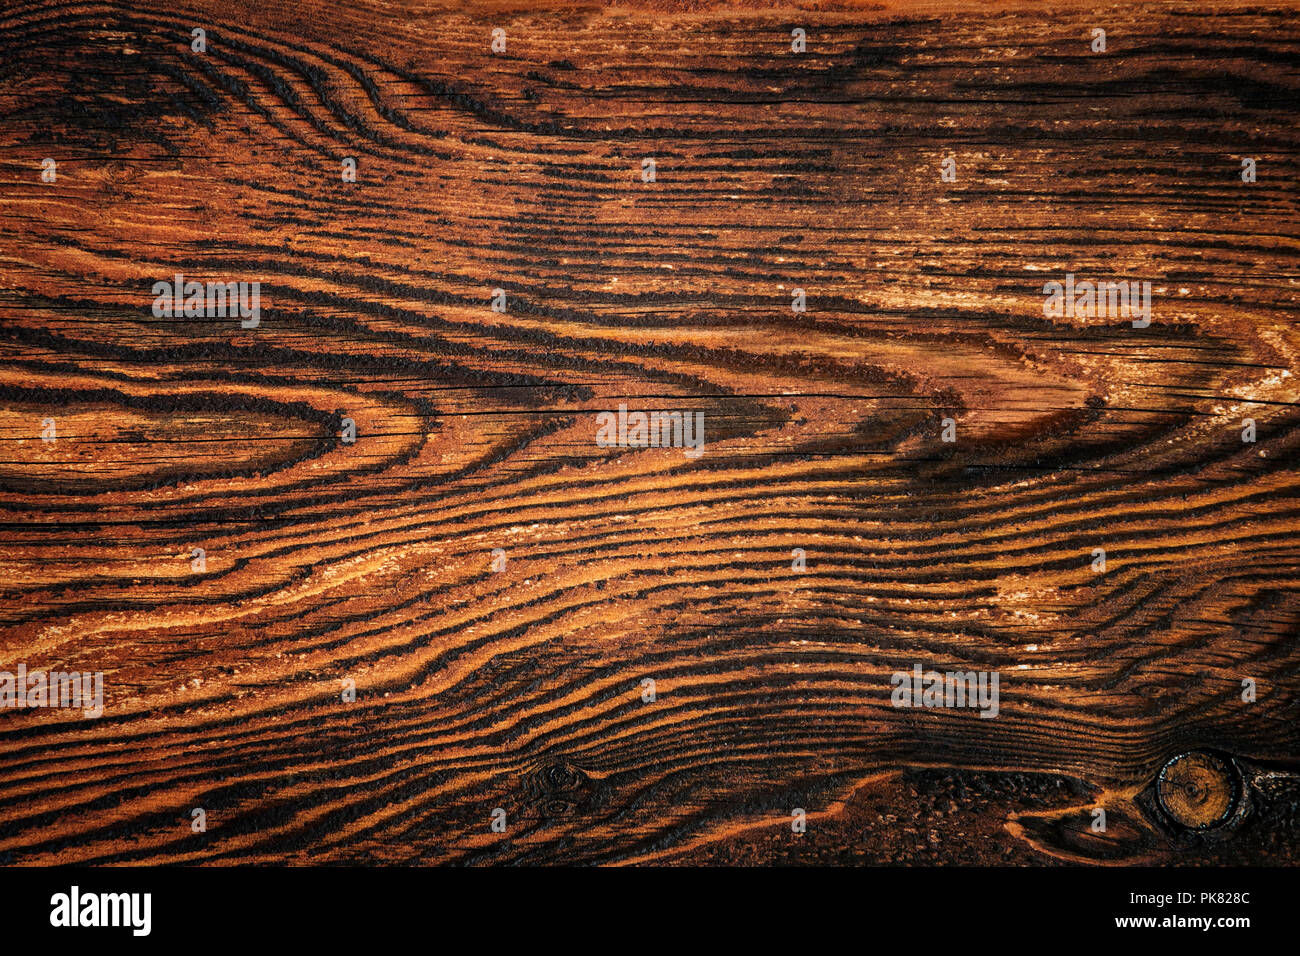 Closeup of an old rich wood grain texture background with knots. Stock Photo